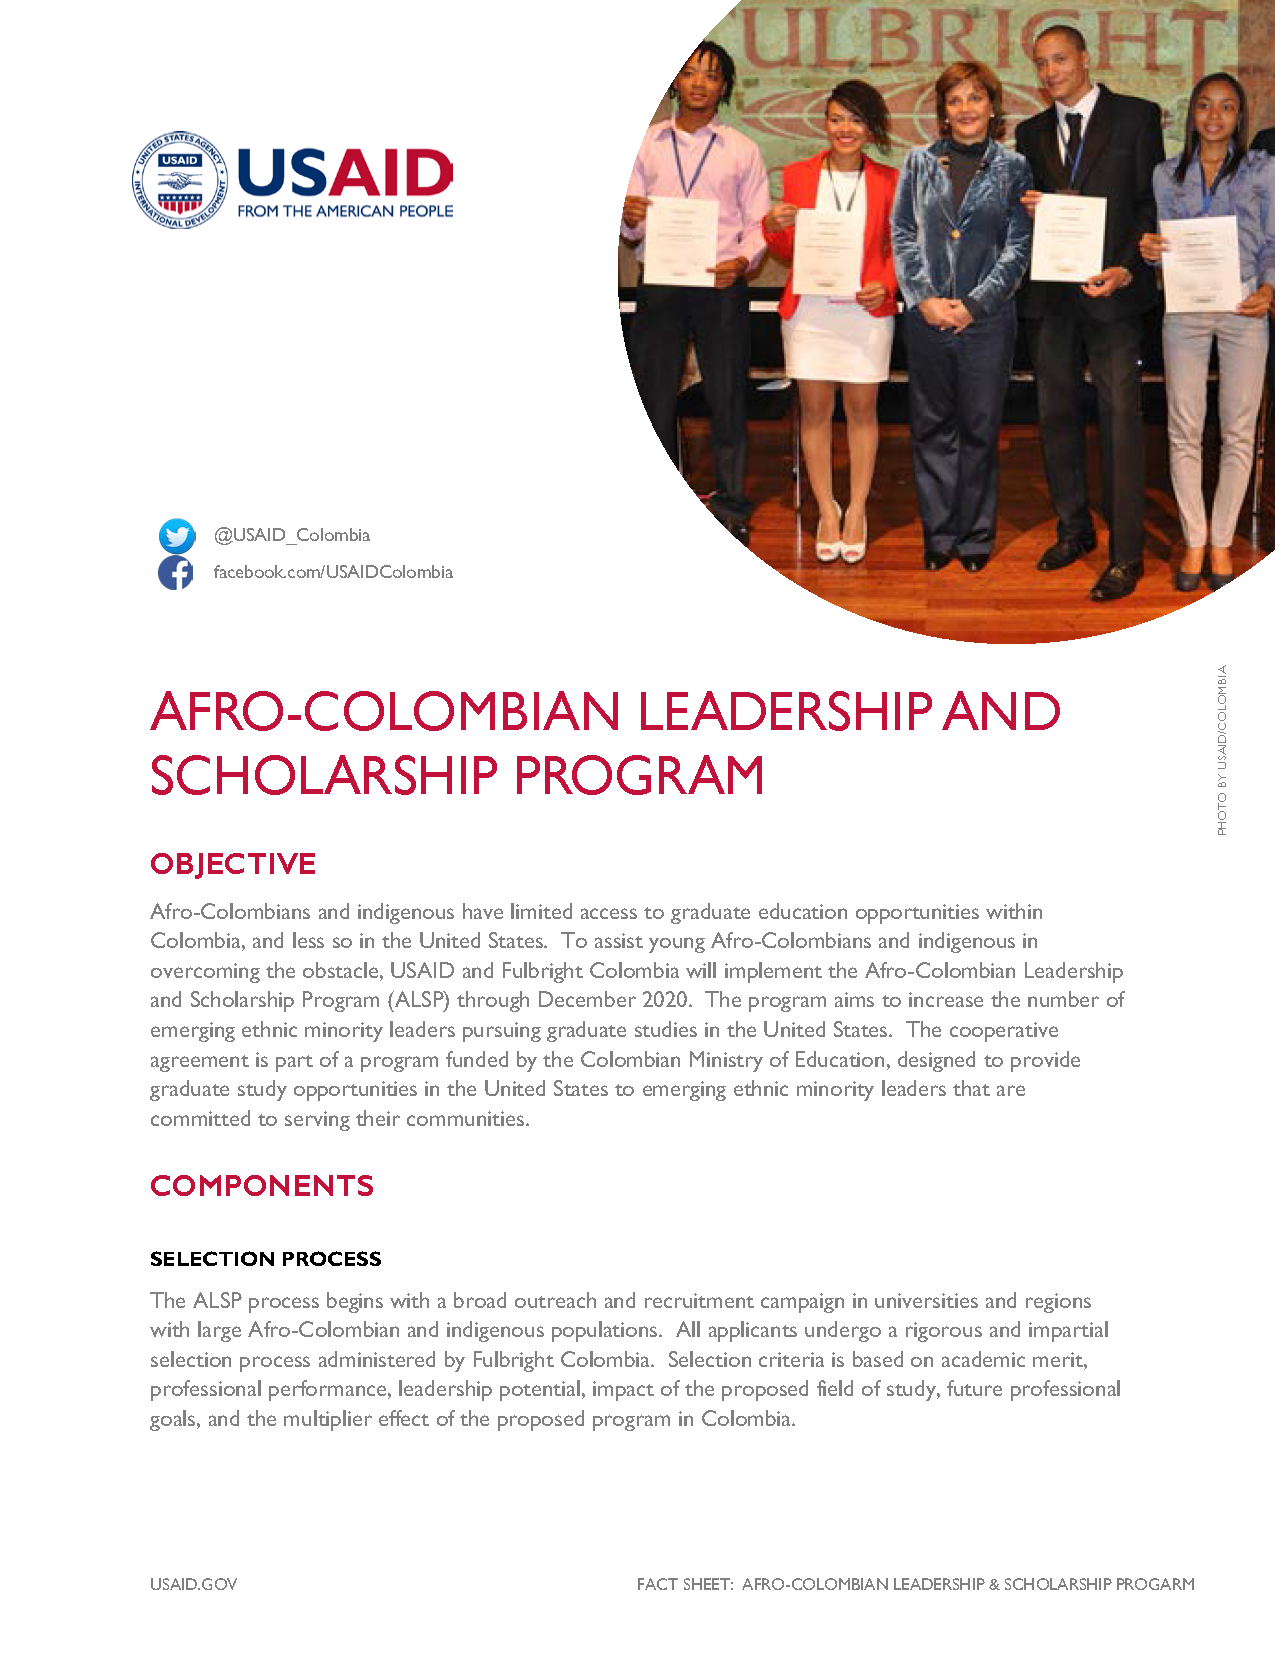 Afro-Colombian Leadership and Scholarship Program